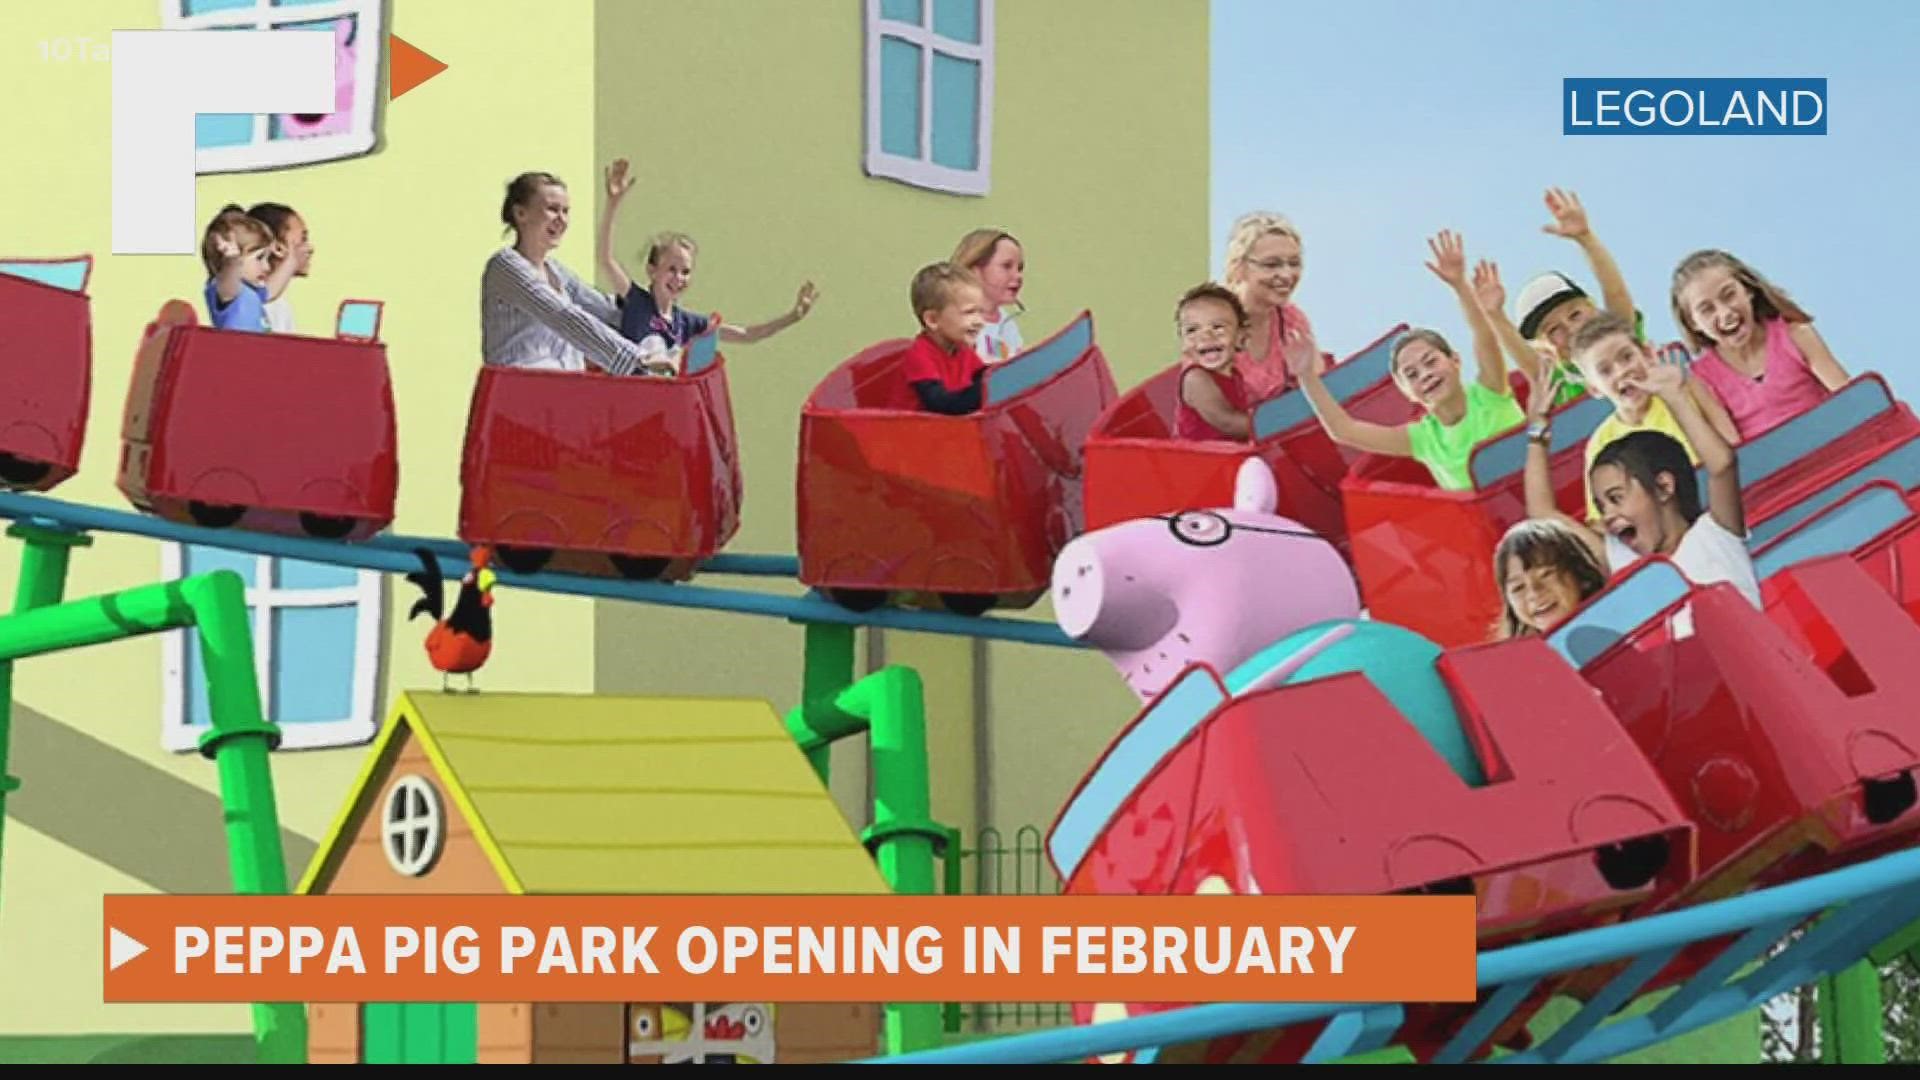 Peppa Pig Theme Park Florida on the App Store